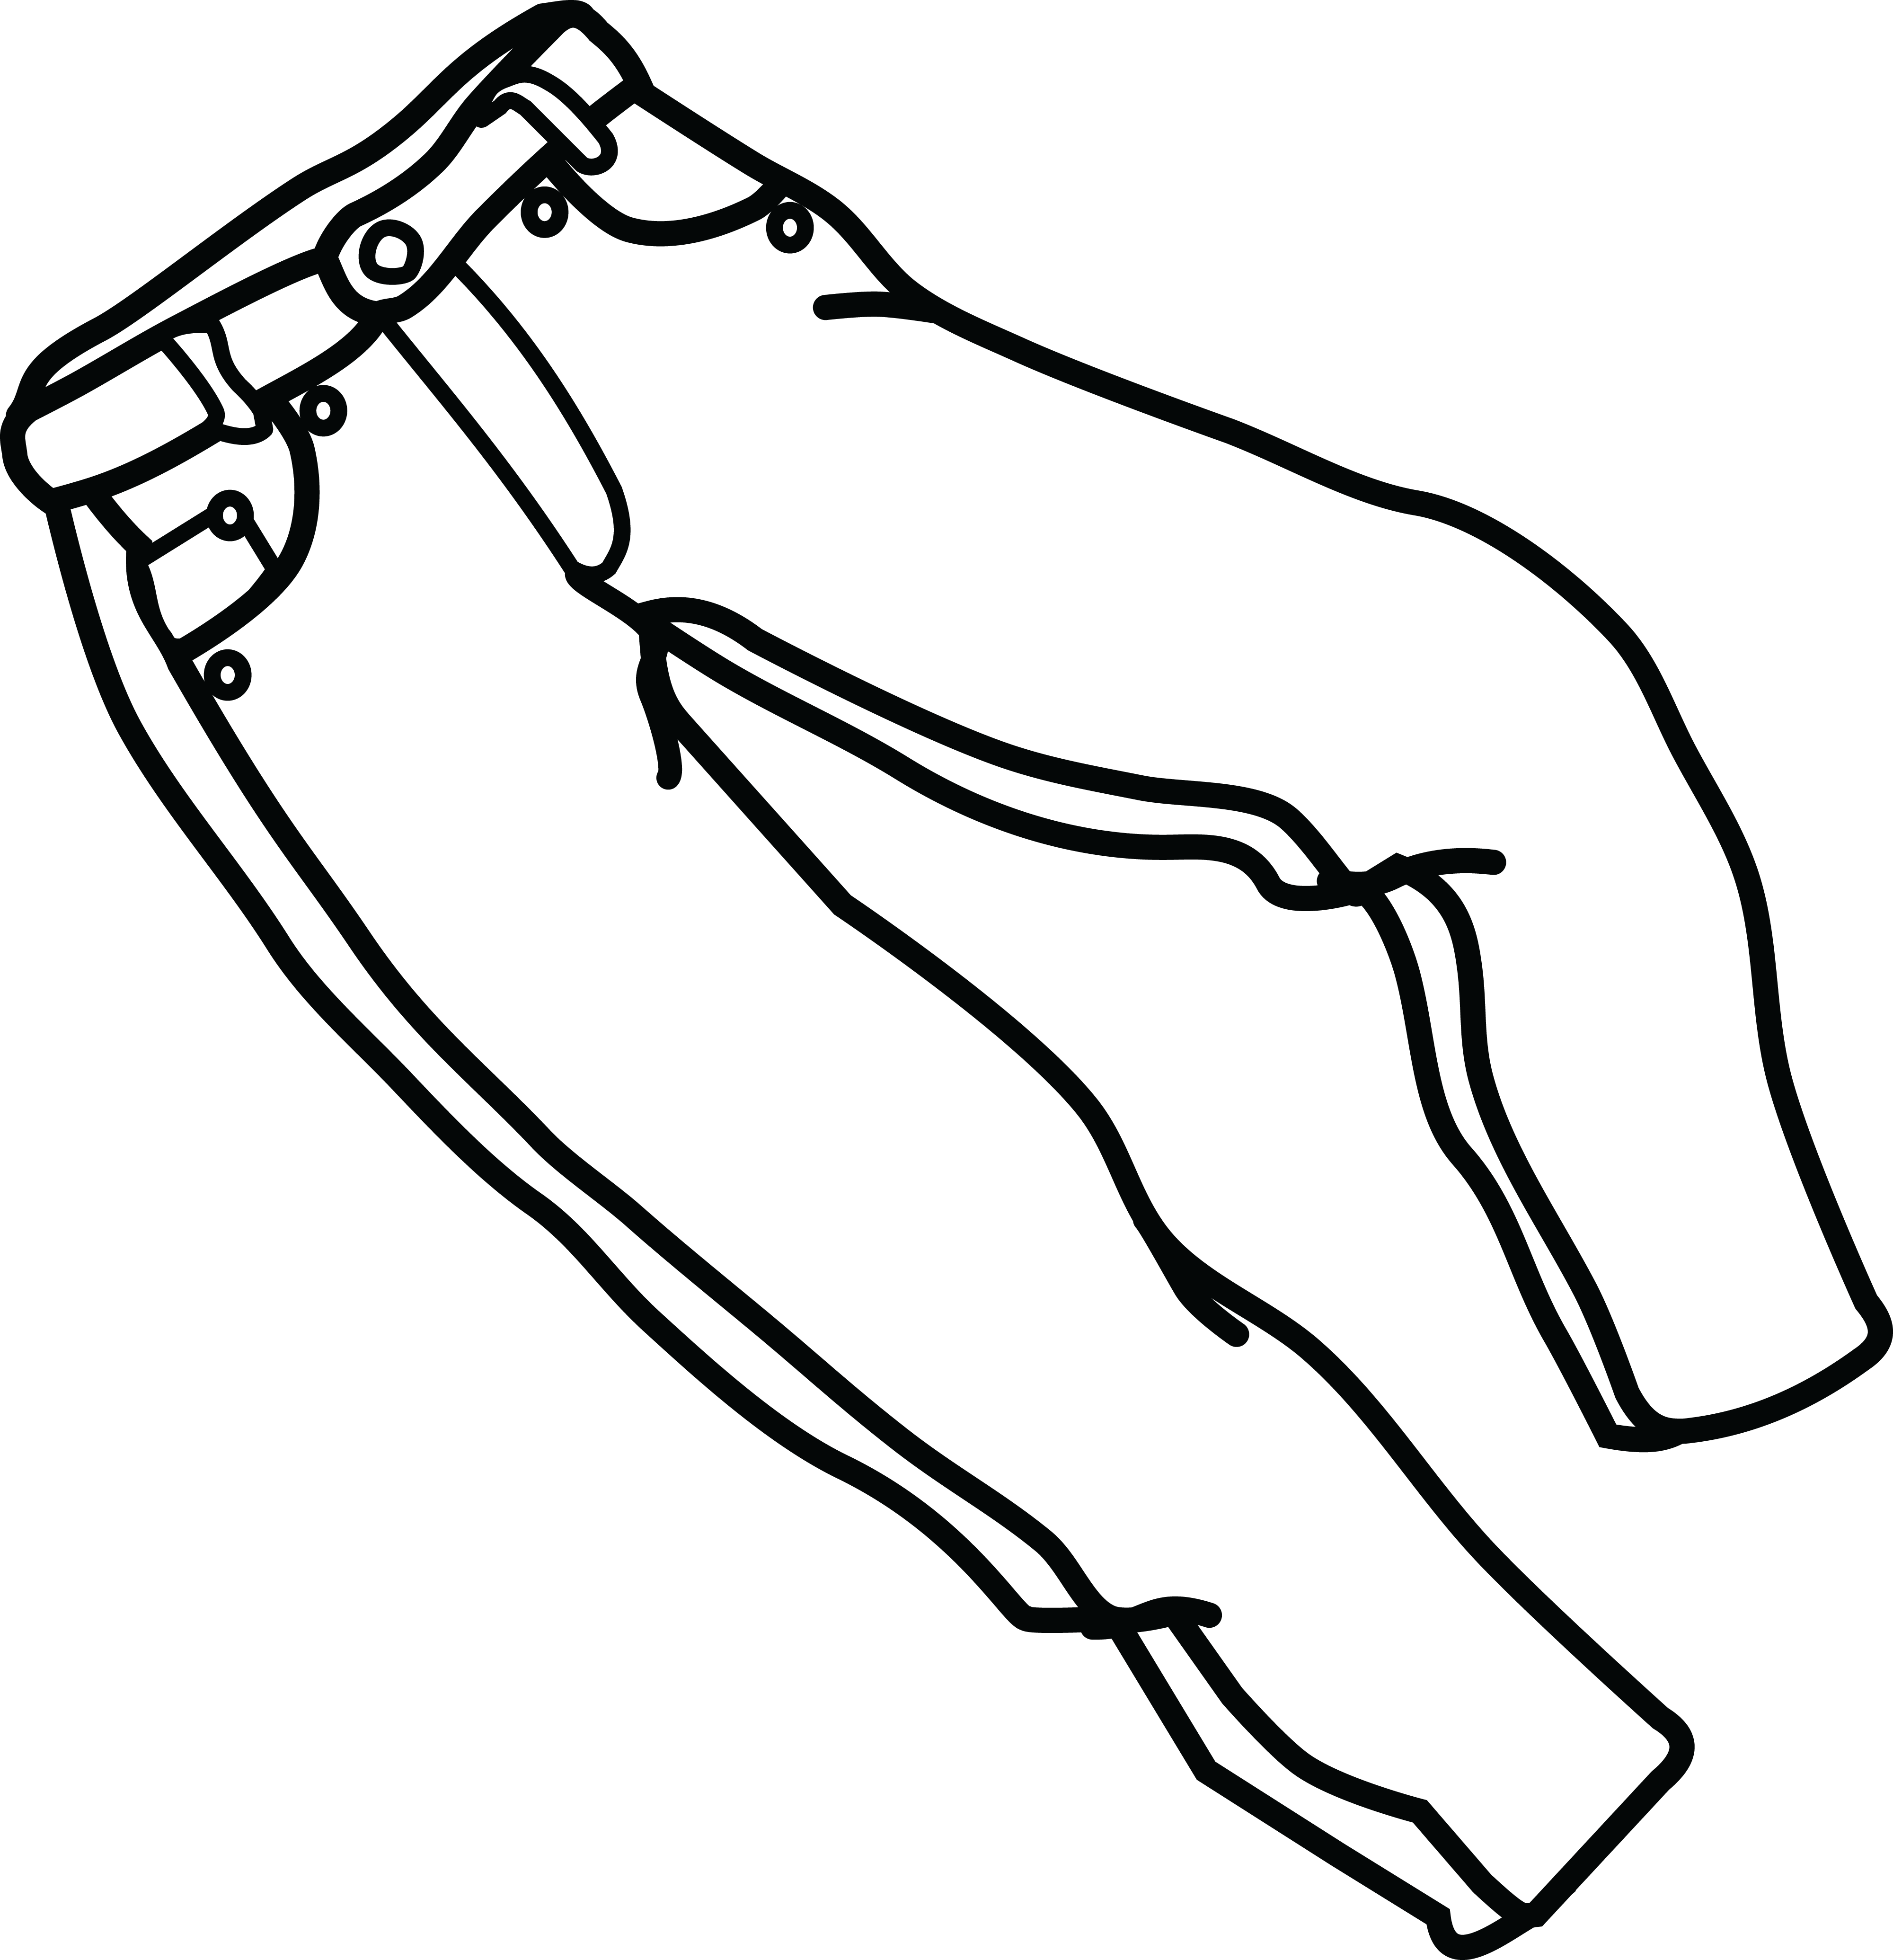 pants clipart black and white